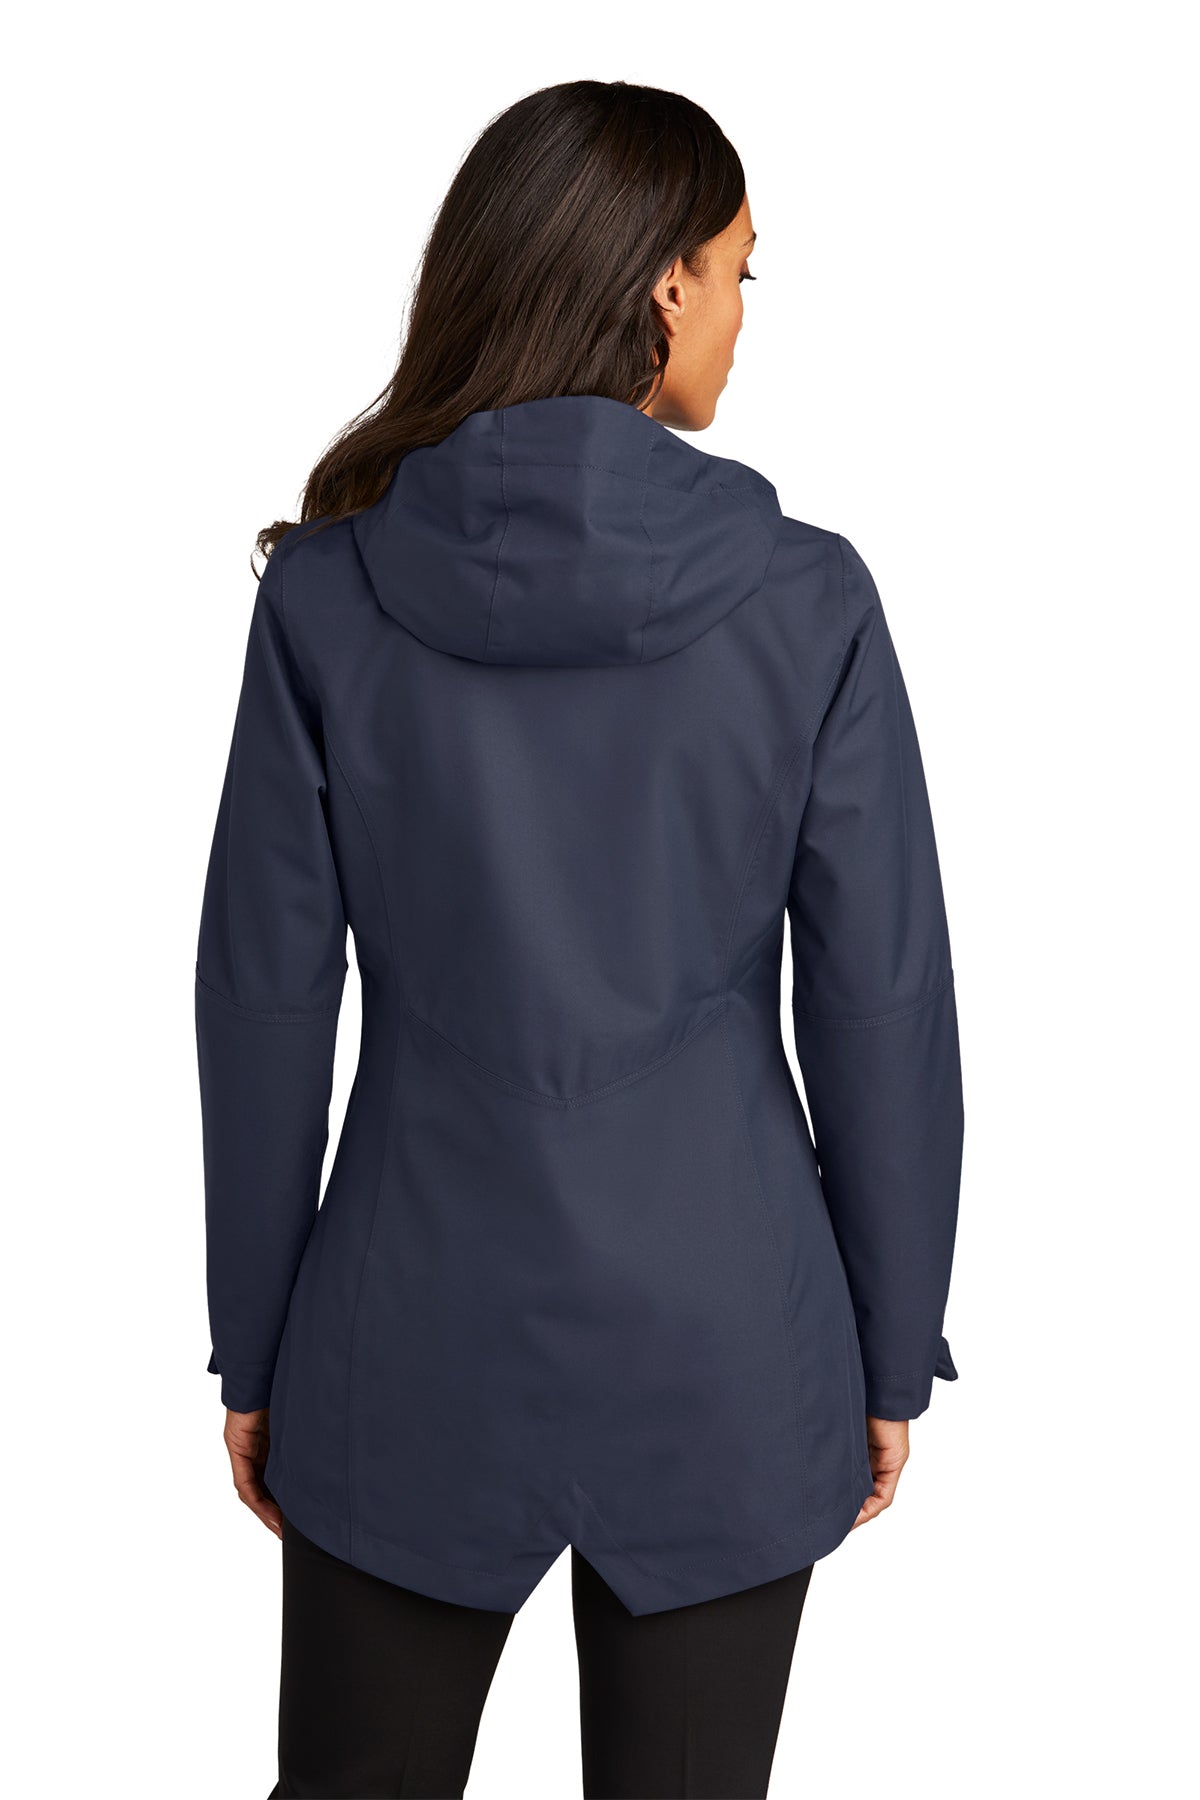 Port Authority Ladies Collective Customized Outer Shell Jackets, River Blue Navy